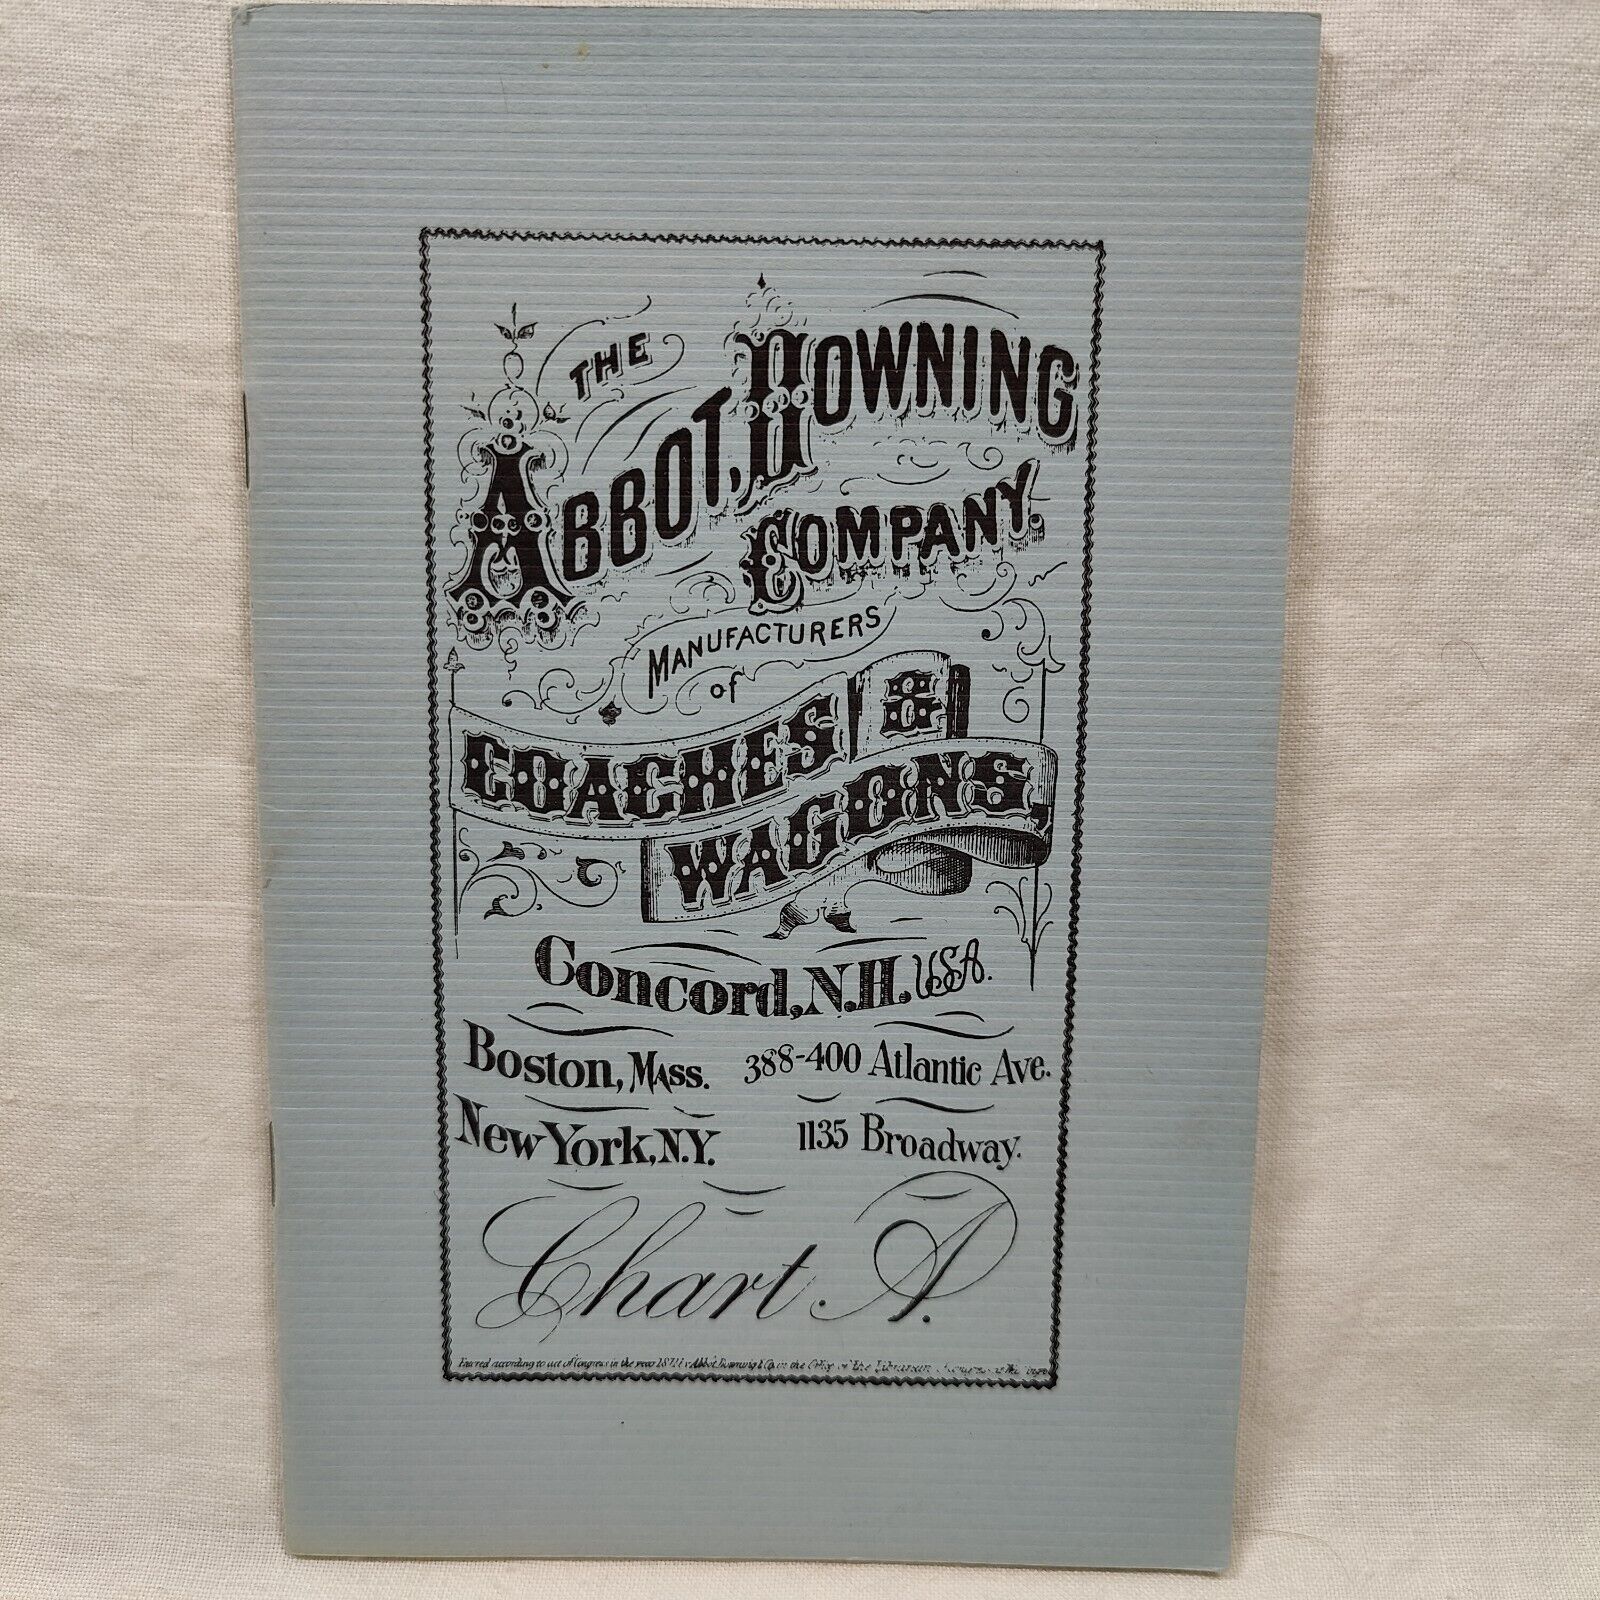 Rare 1984 Vintage Reprint Abbot Downing Coach & Wagon Product Catalog Booklet